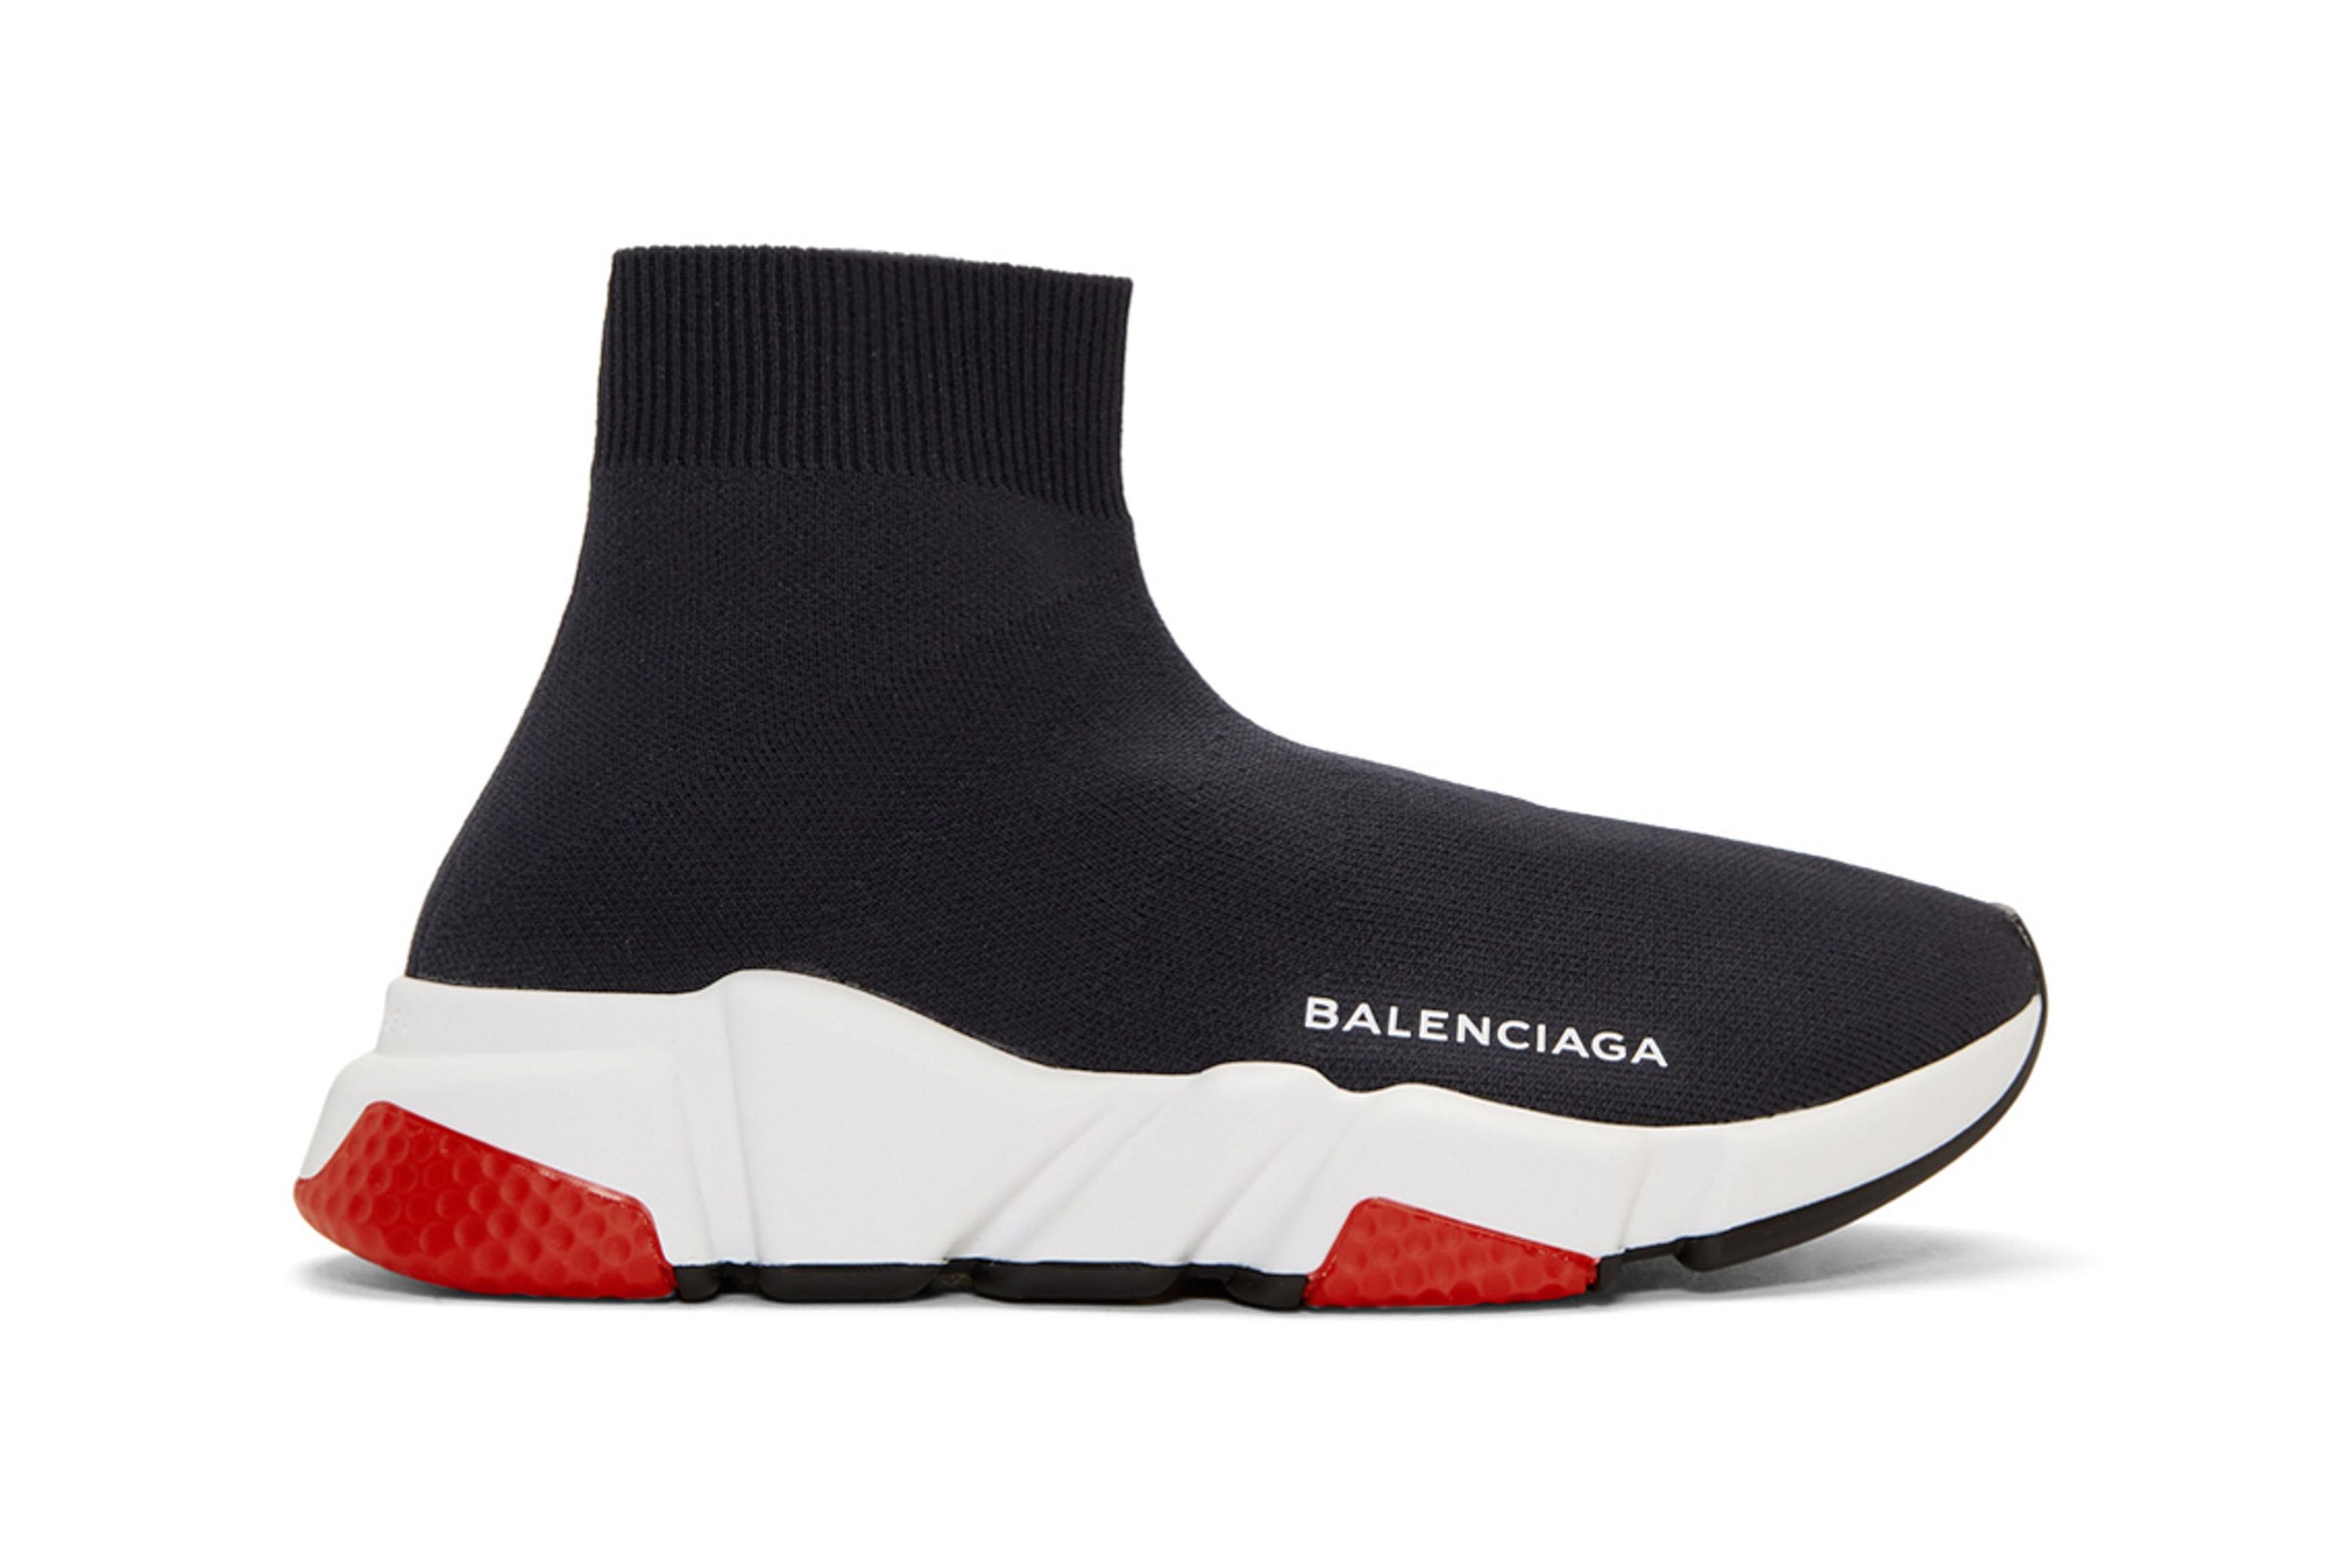 Balenciaga Adds 'Navy' and 'Black' to its Speed Trainer Lineup